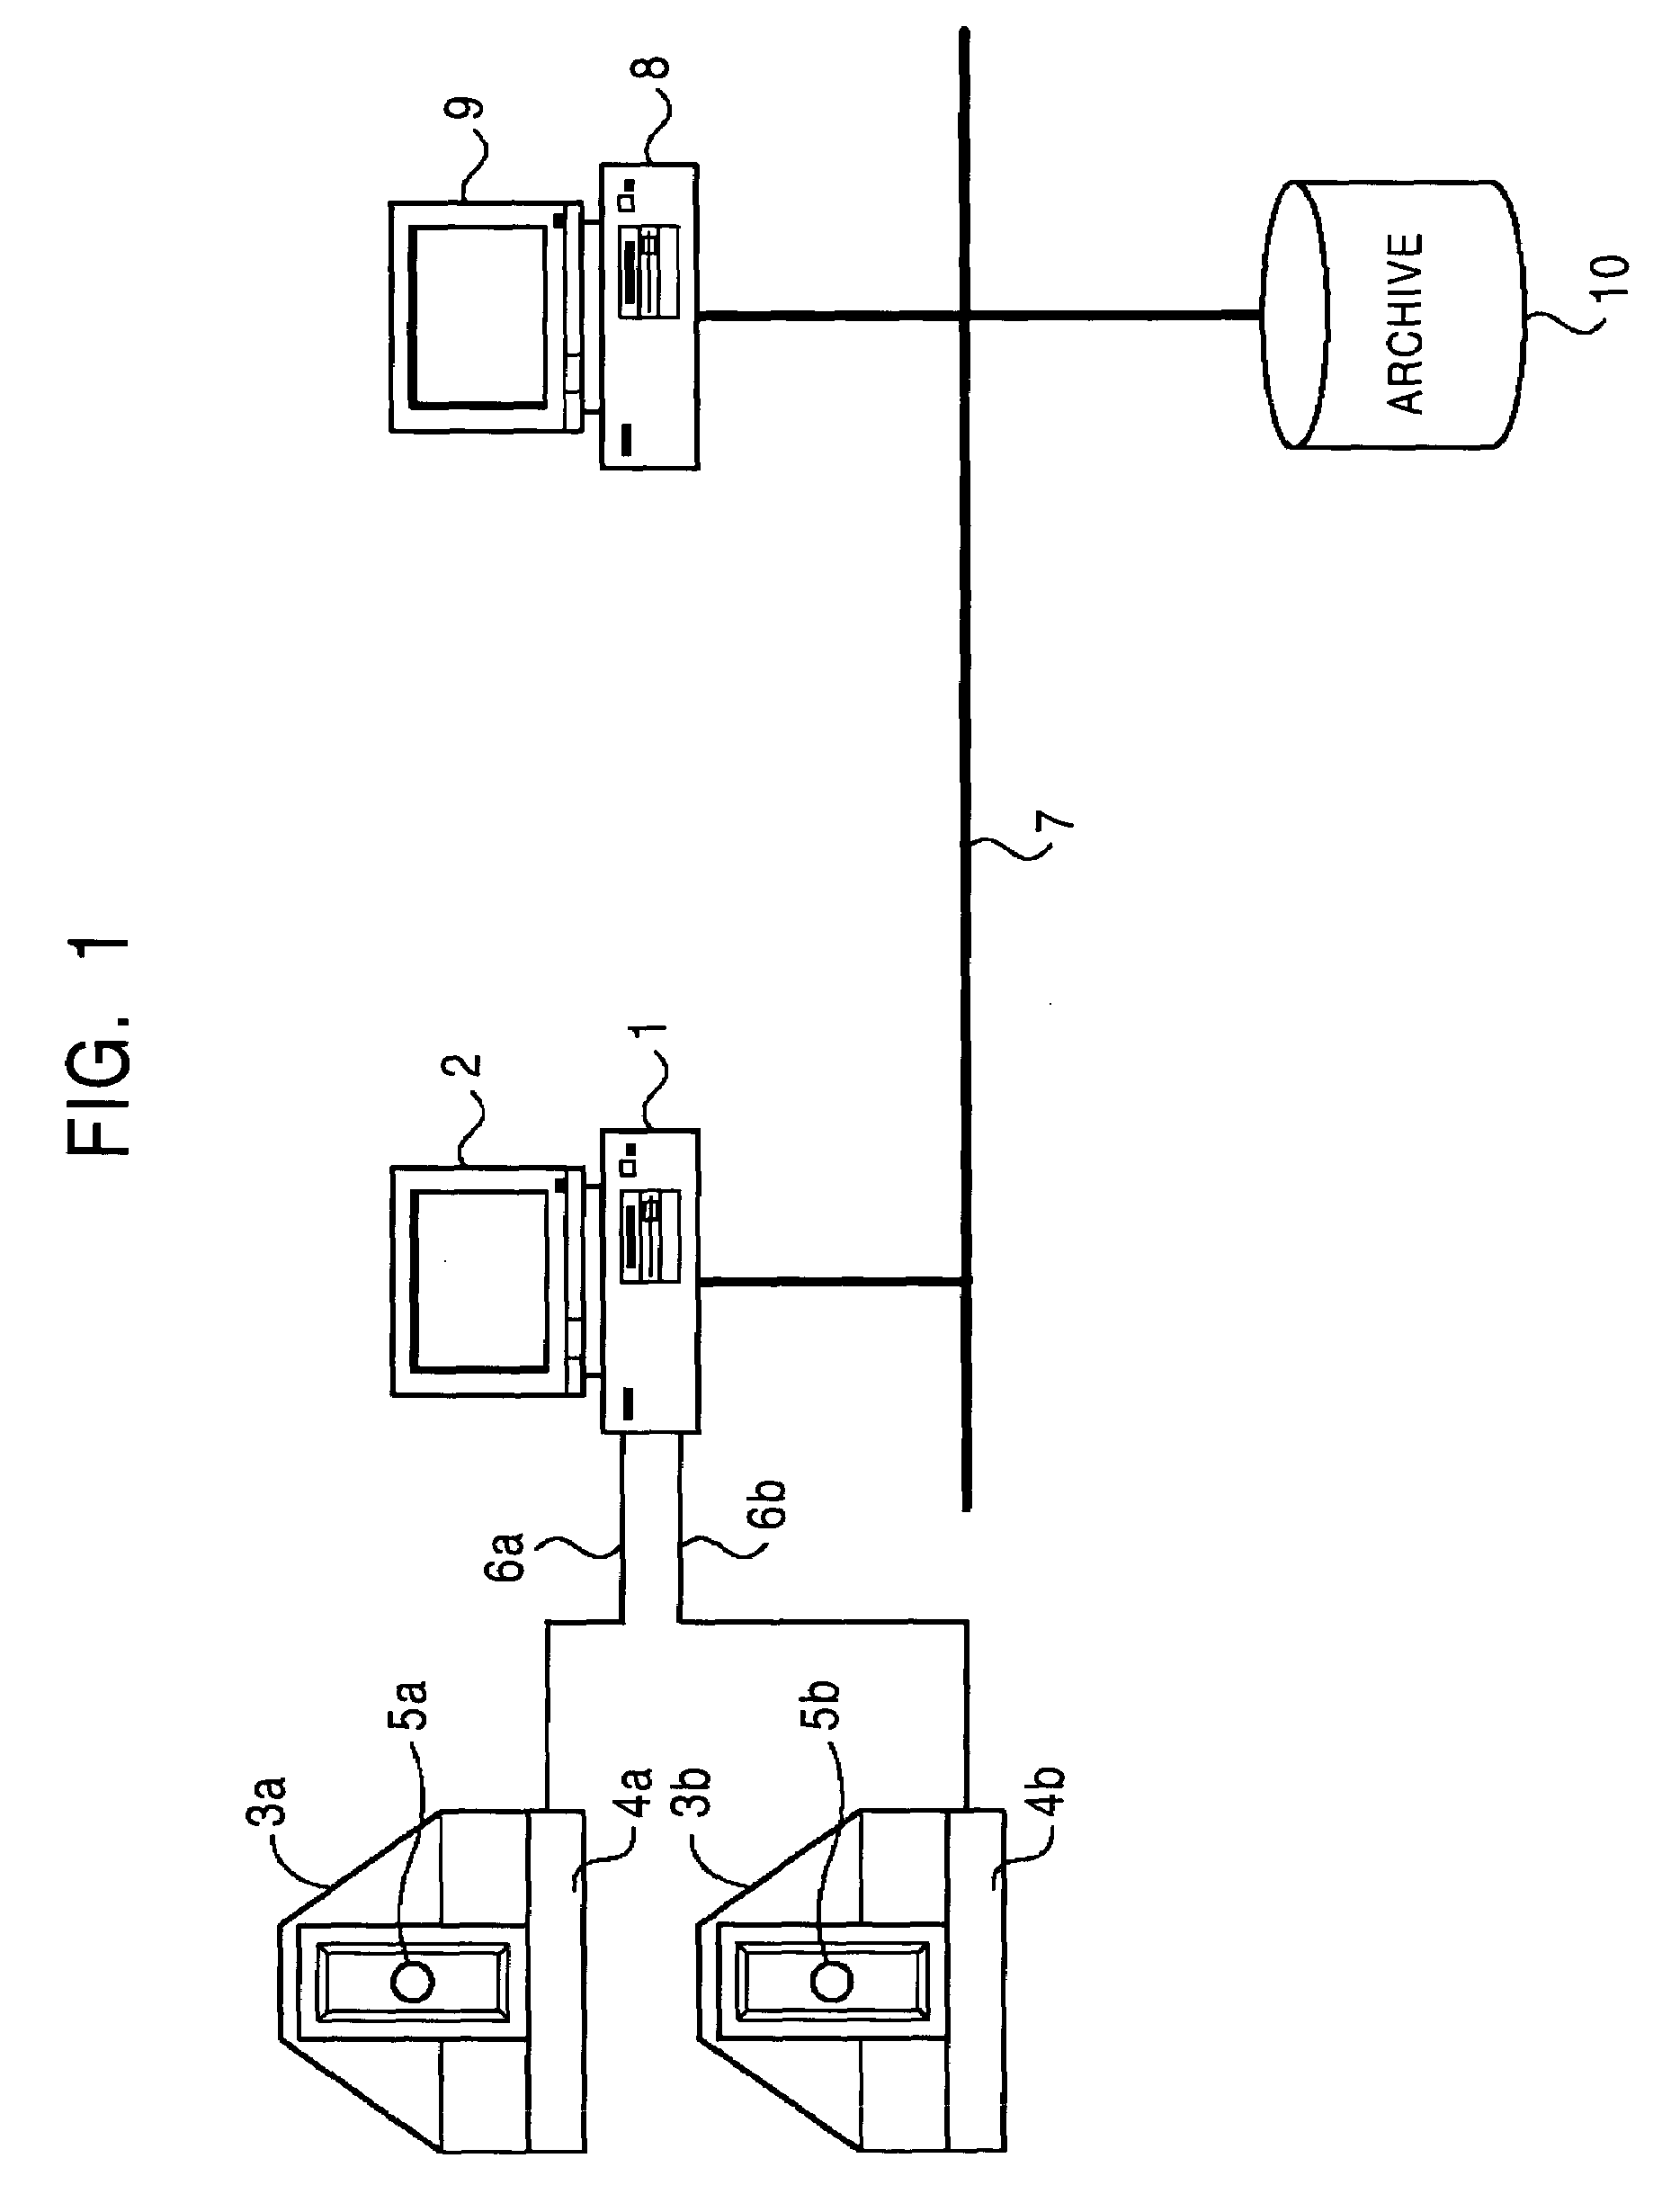 Camera surveillance system and method for displaying multiple zoom levels of an image on different portions of a display